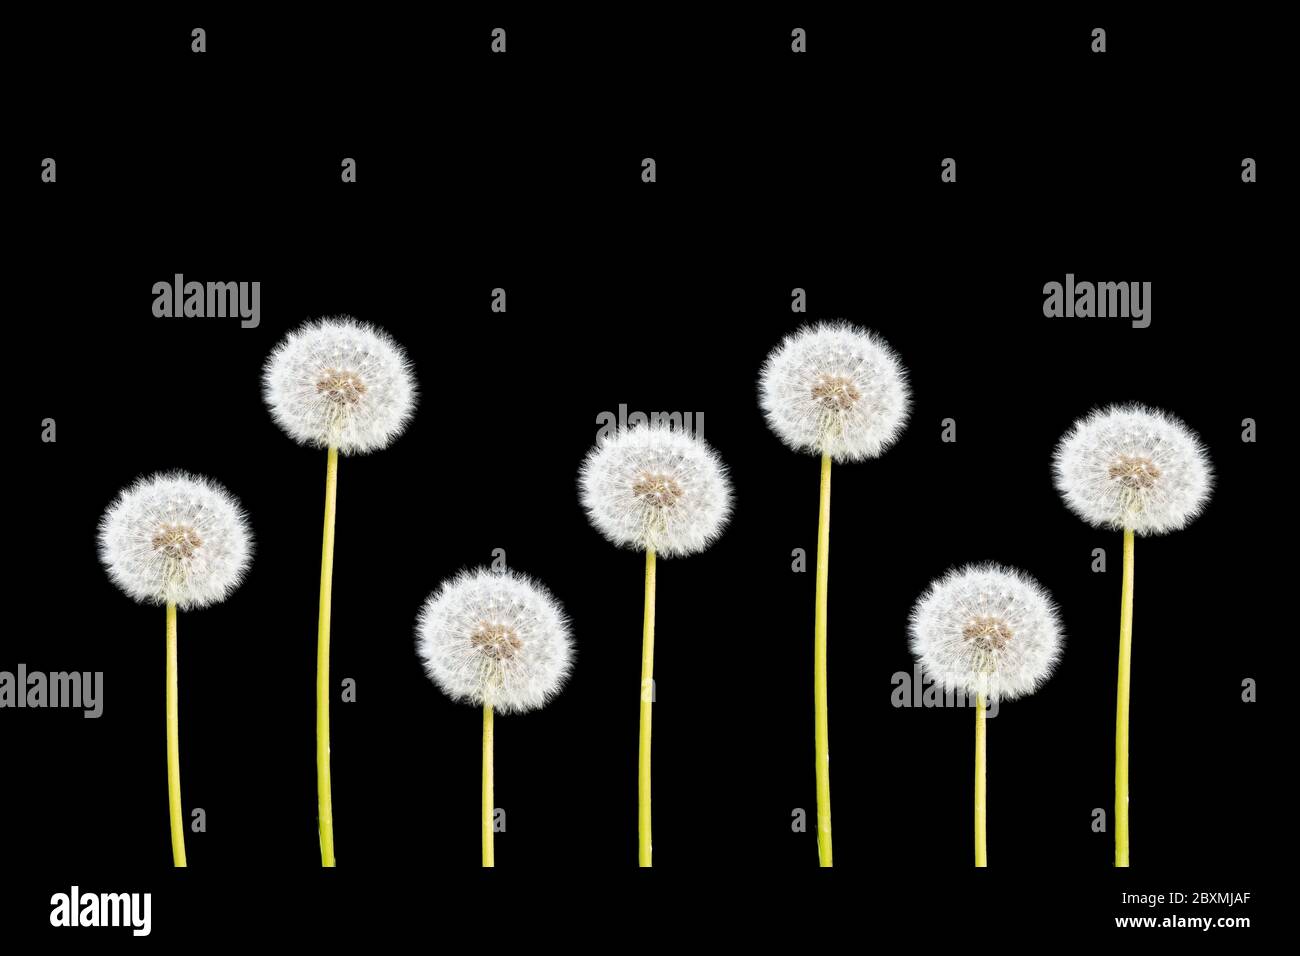 Dandelion seed heads isolated on black background. Stock Photo